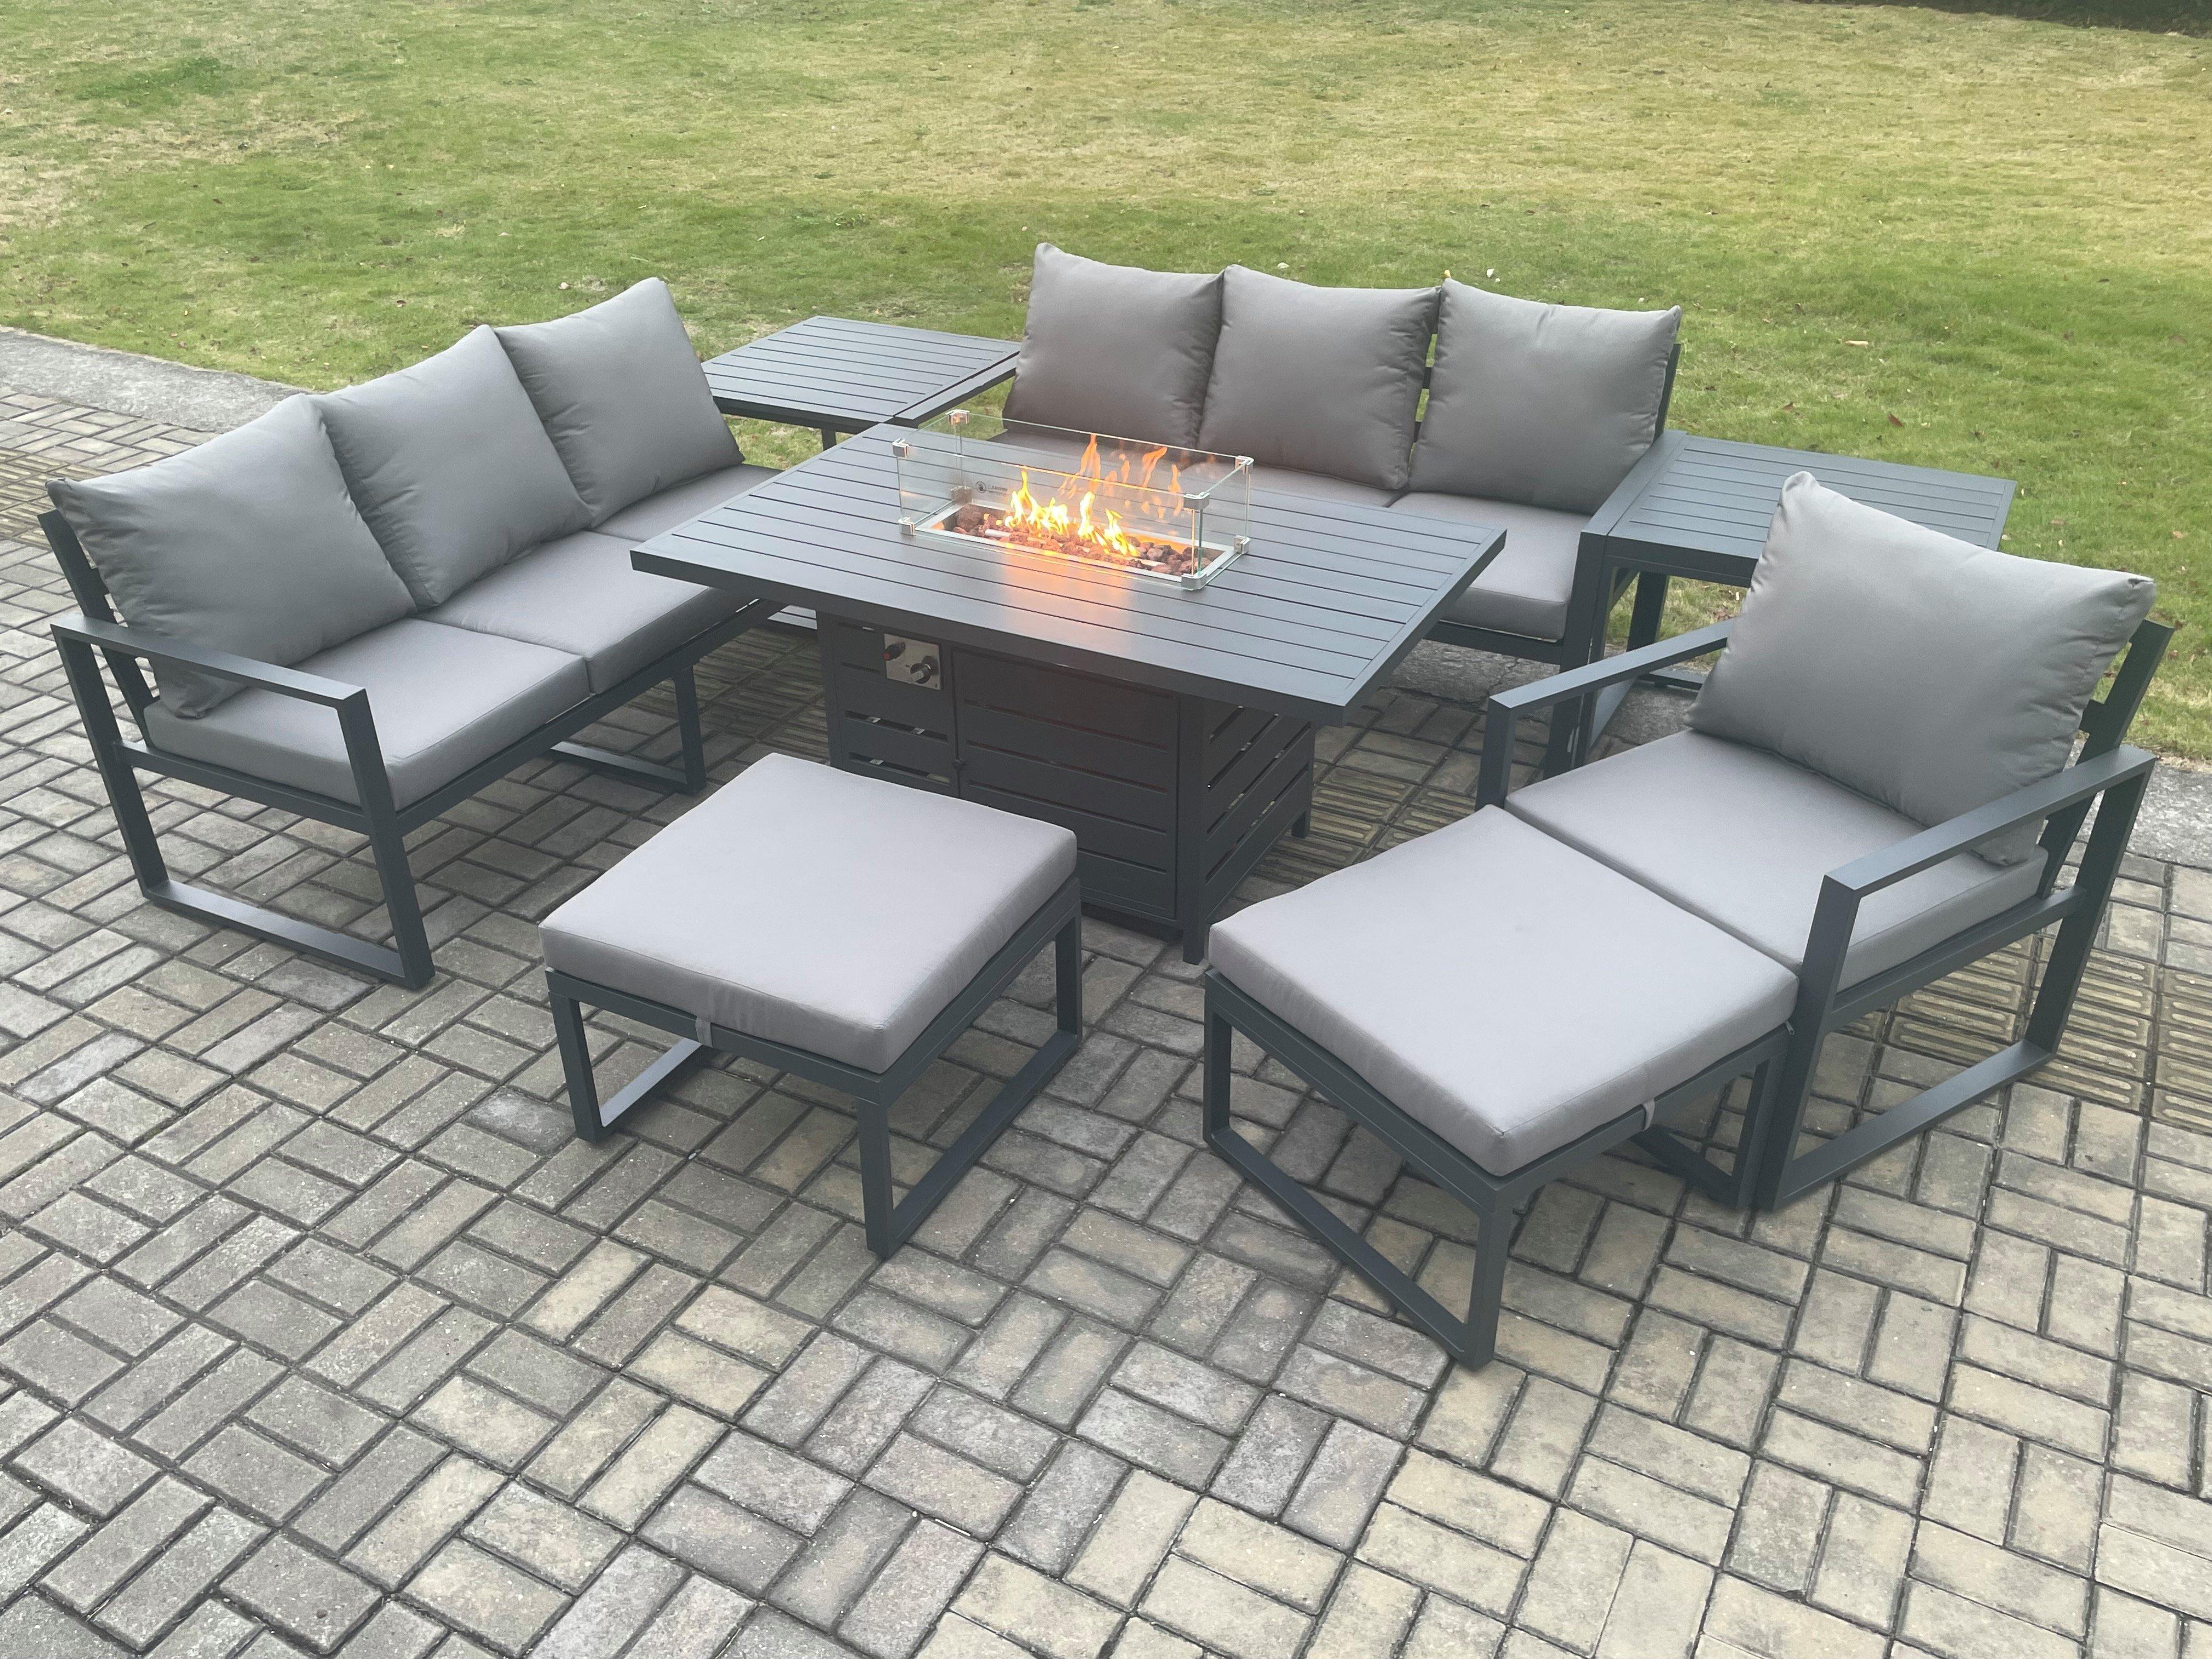 Aluminium 8 Pieces Garden Furniture Sofa Set with Cushions 9 Seater Gas Fire Pit Dining Table Set wi